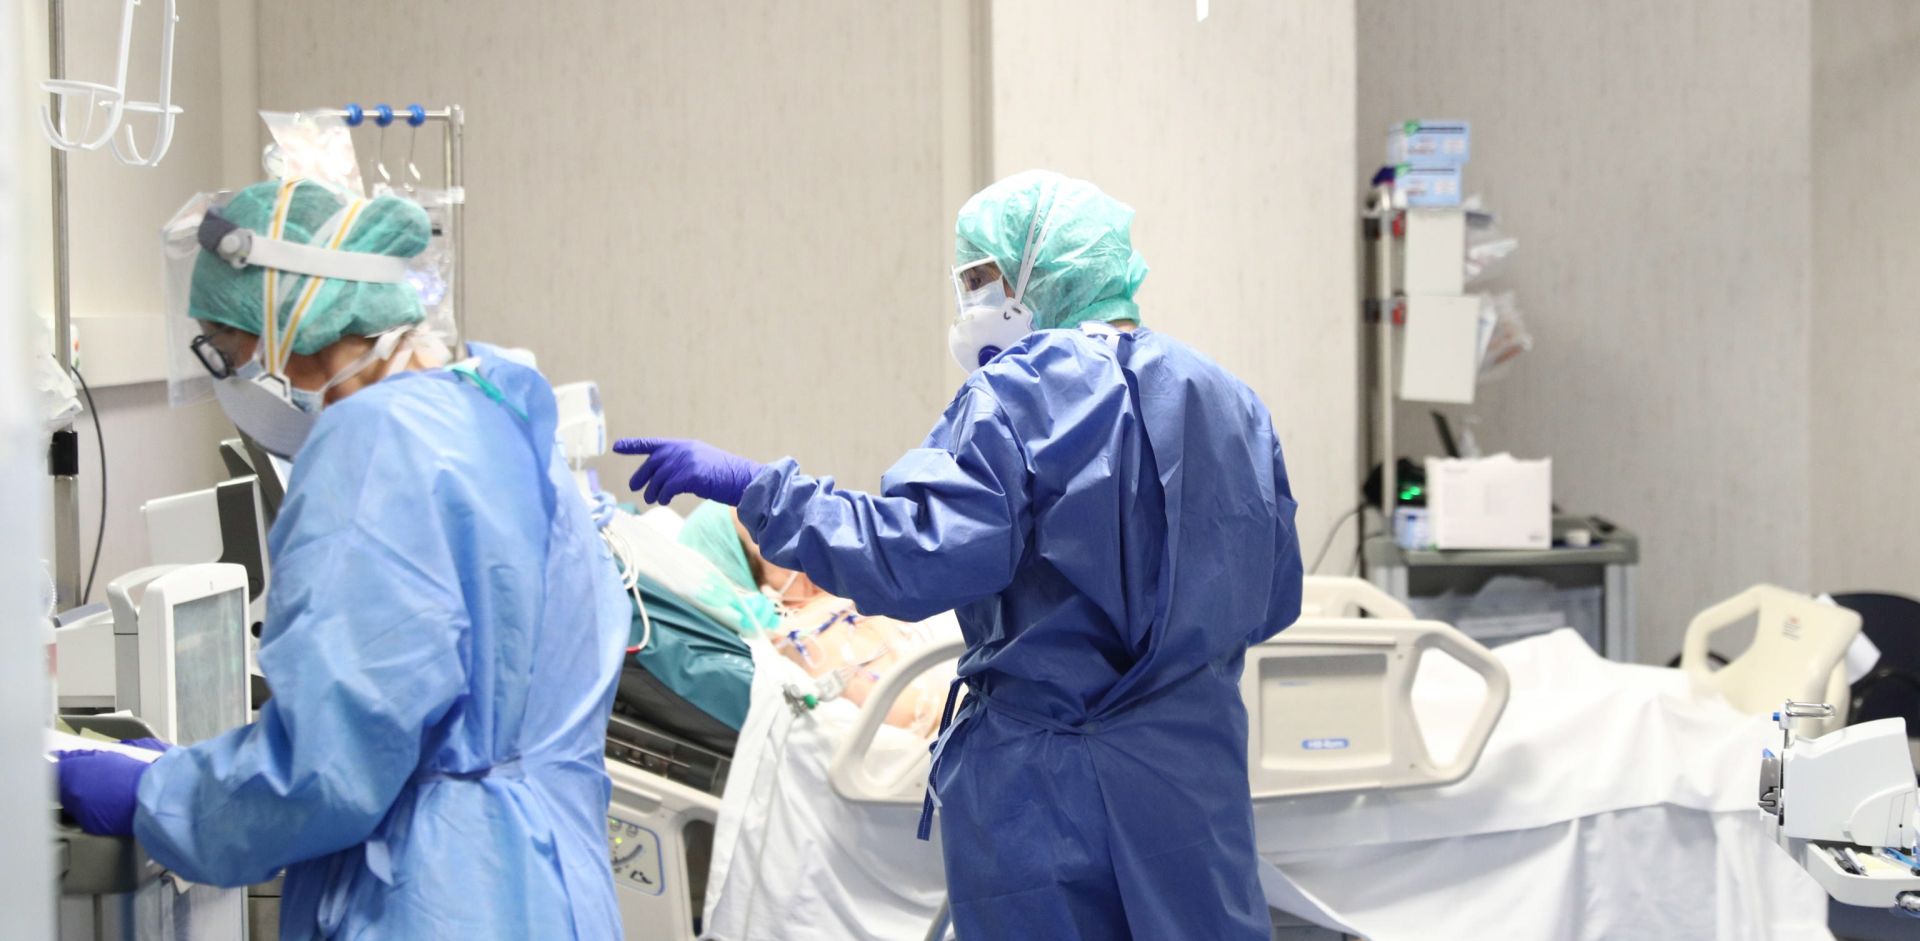 epa08306809 Healthcare personnel wearing protective suits and mask at work in the intensive care unit of the Brescia's Hospital, Italy, 19 March 2020. Italy has reported at least 35,713 confirmed cases of the COVID-19 disease caused by the SARS-CoV-2 coronavirus and 2,978 deaths so far. The Mediterranean country remains in total lockdown as the pandemic disease spreads through Europe.  EPA/FILIPPO VENEZIA